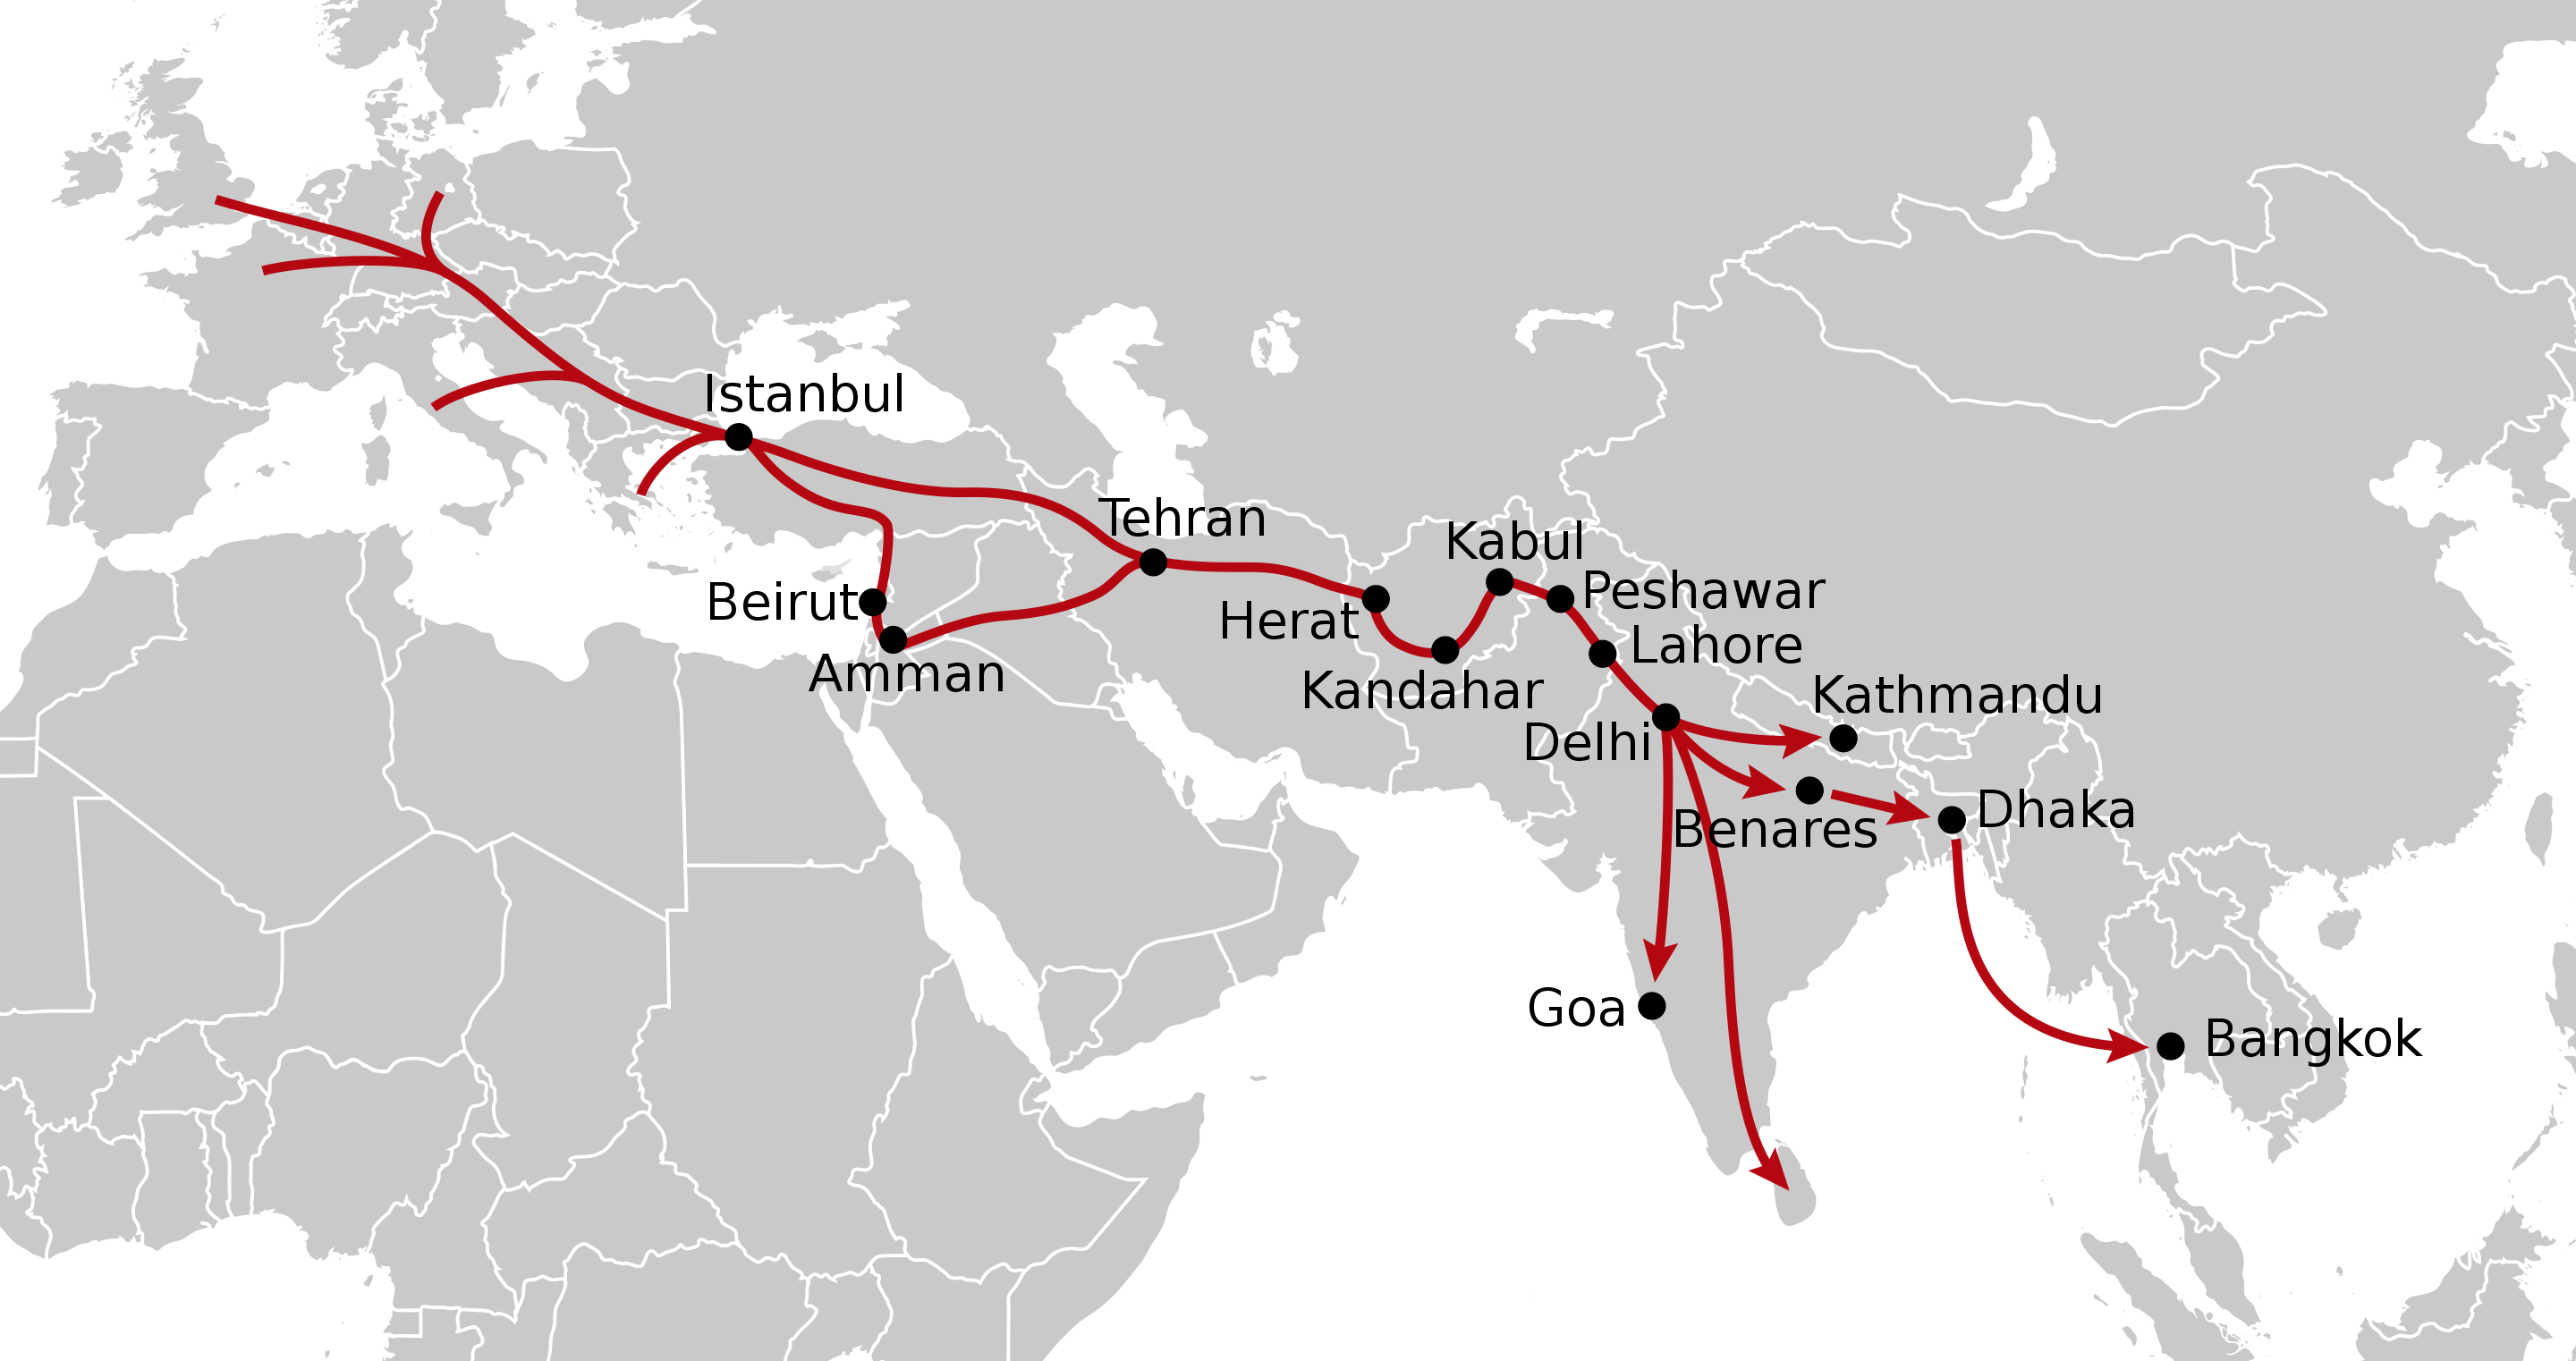 The hippie trail spans 12,000 miles from Europe to Asia